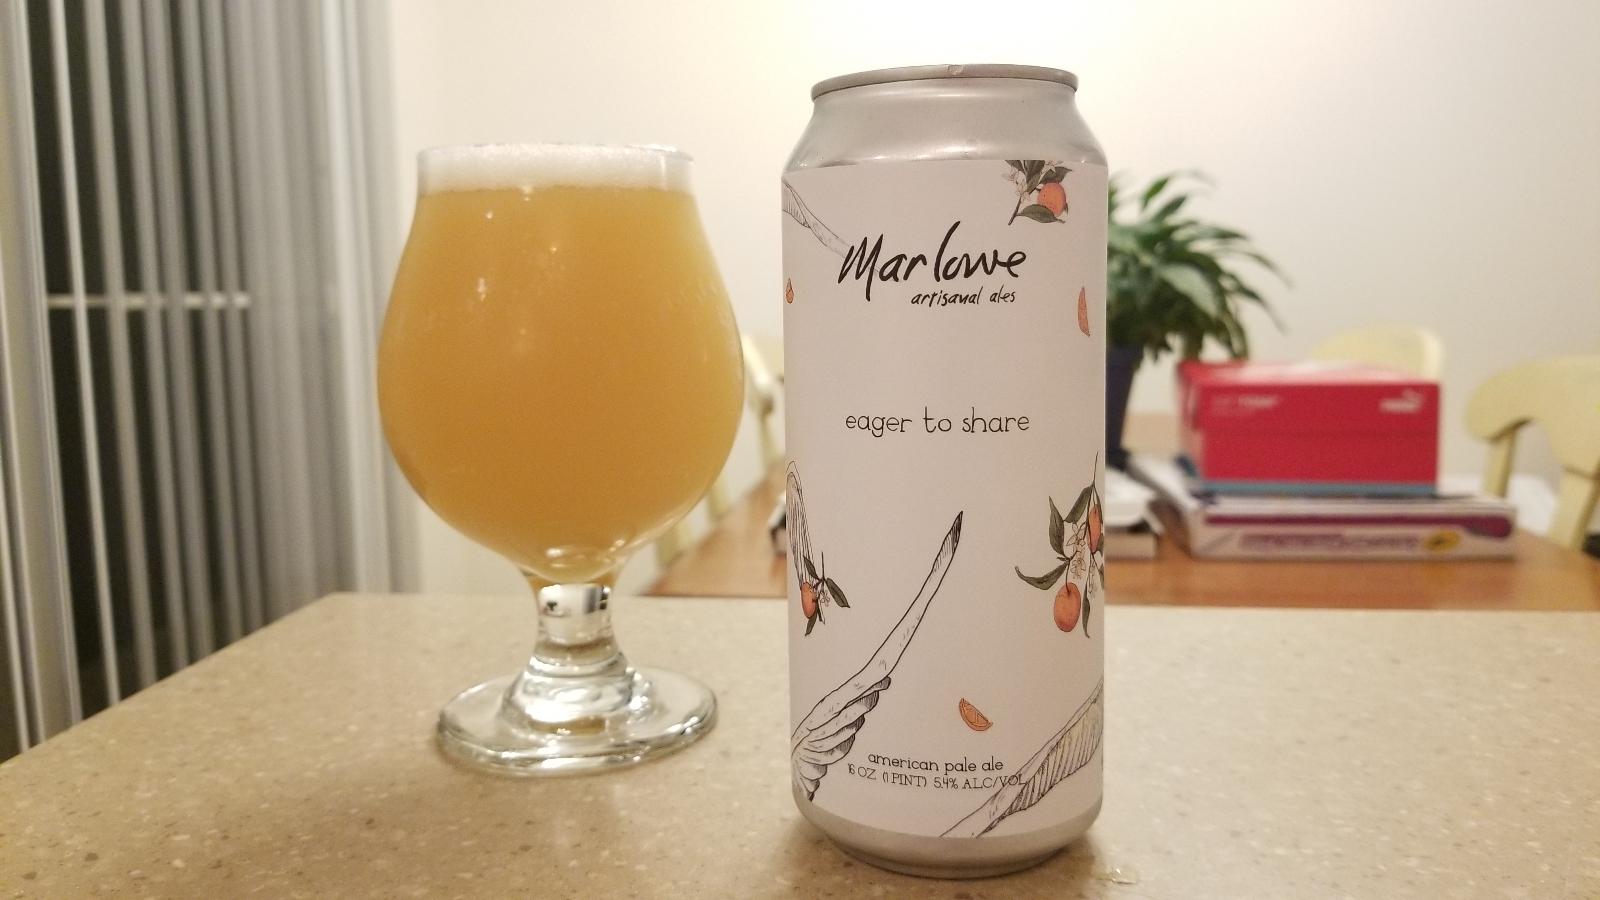 Eager To Share: Citra & Mosaic